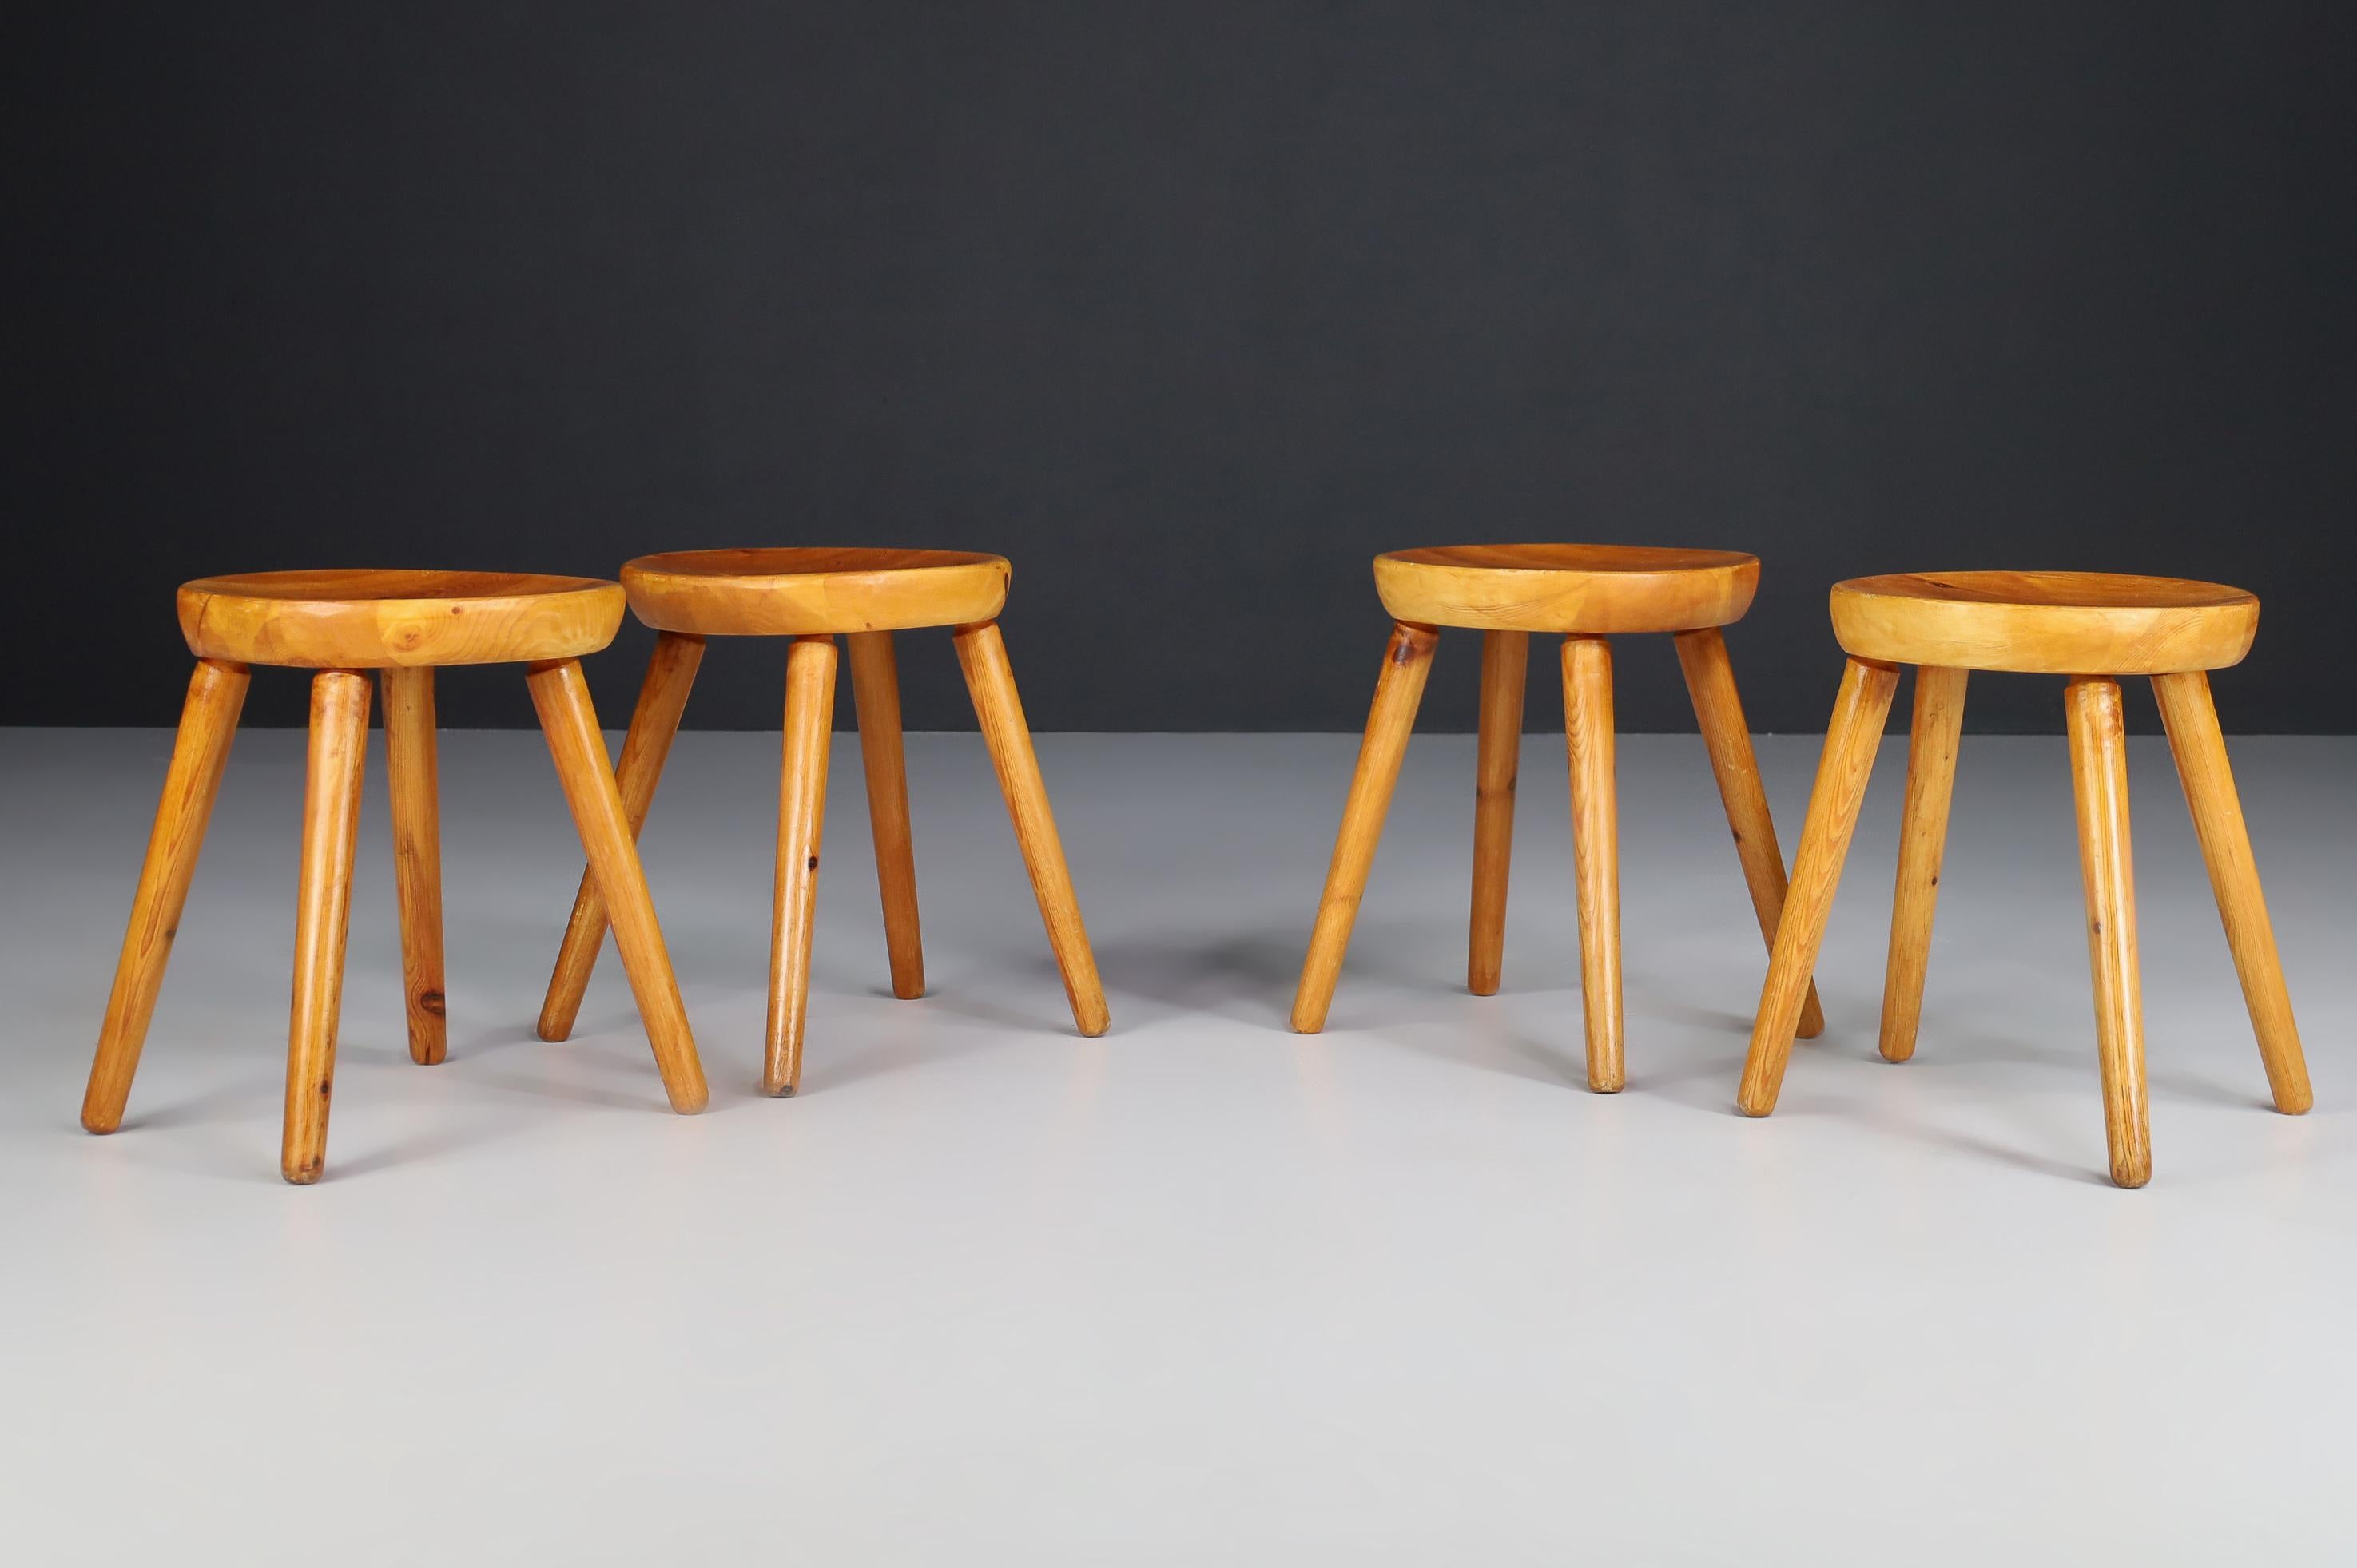 Pinewood French stools in the style of Charlotte Perriand France, 1950s.

Collectable pine stools in the style of Charlotte Perriand were made in France in the 1950s. No screws or hardware are used on stools. Beautiful joinery and grain details.